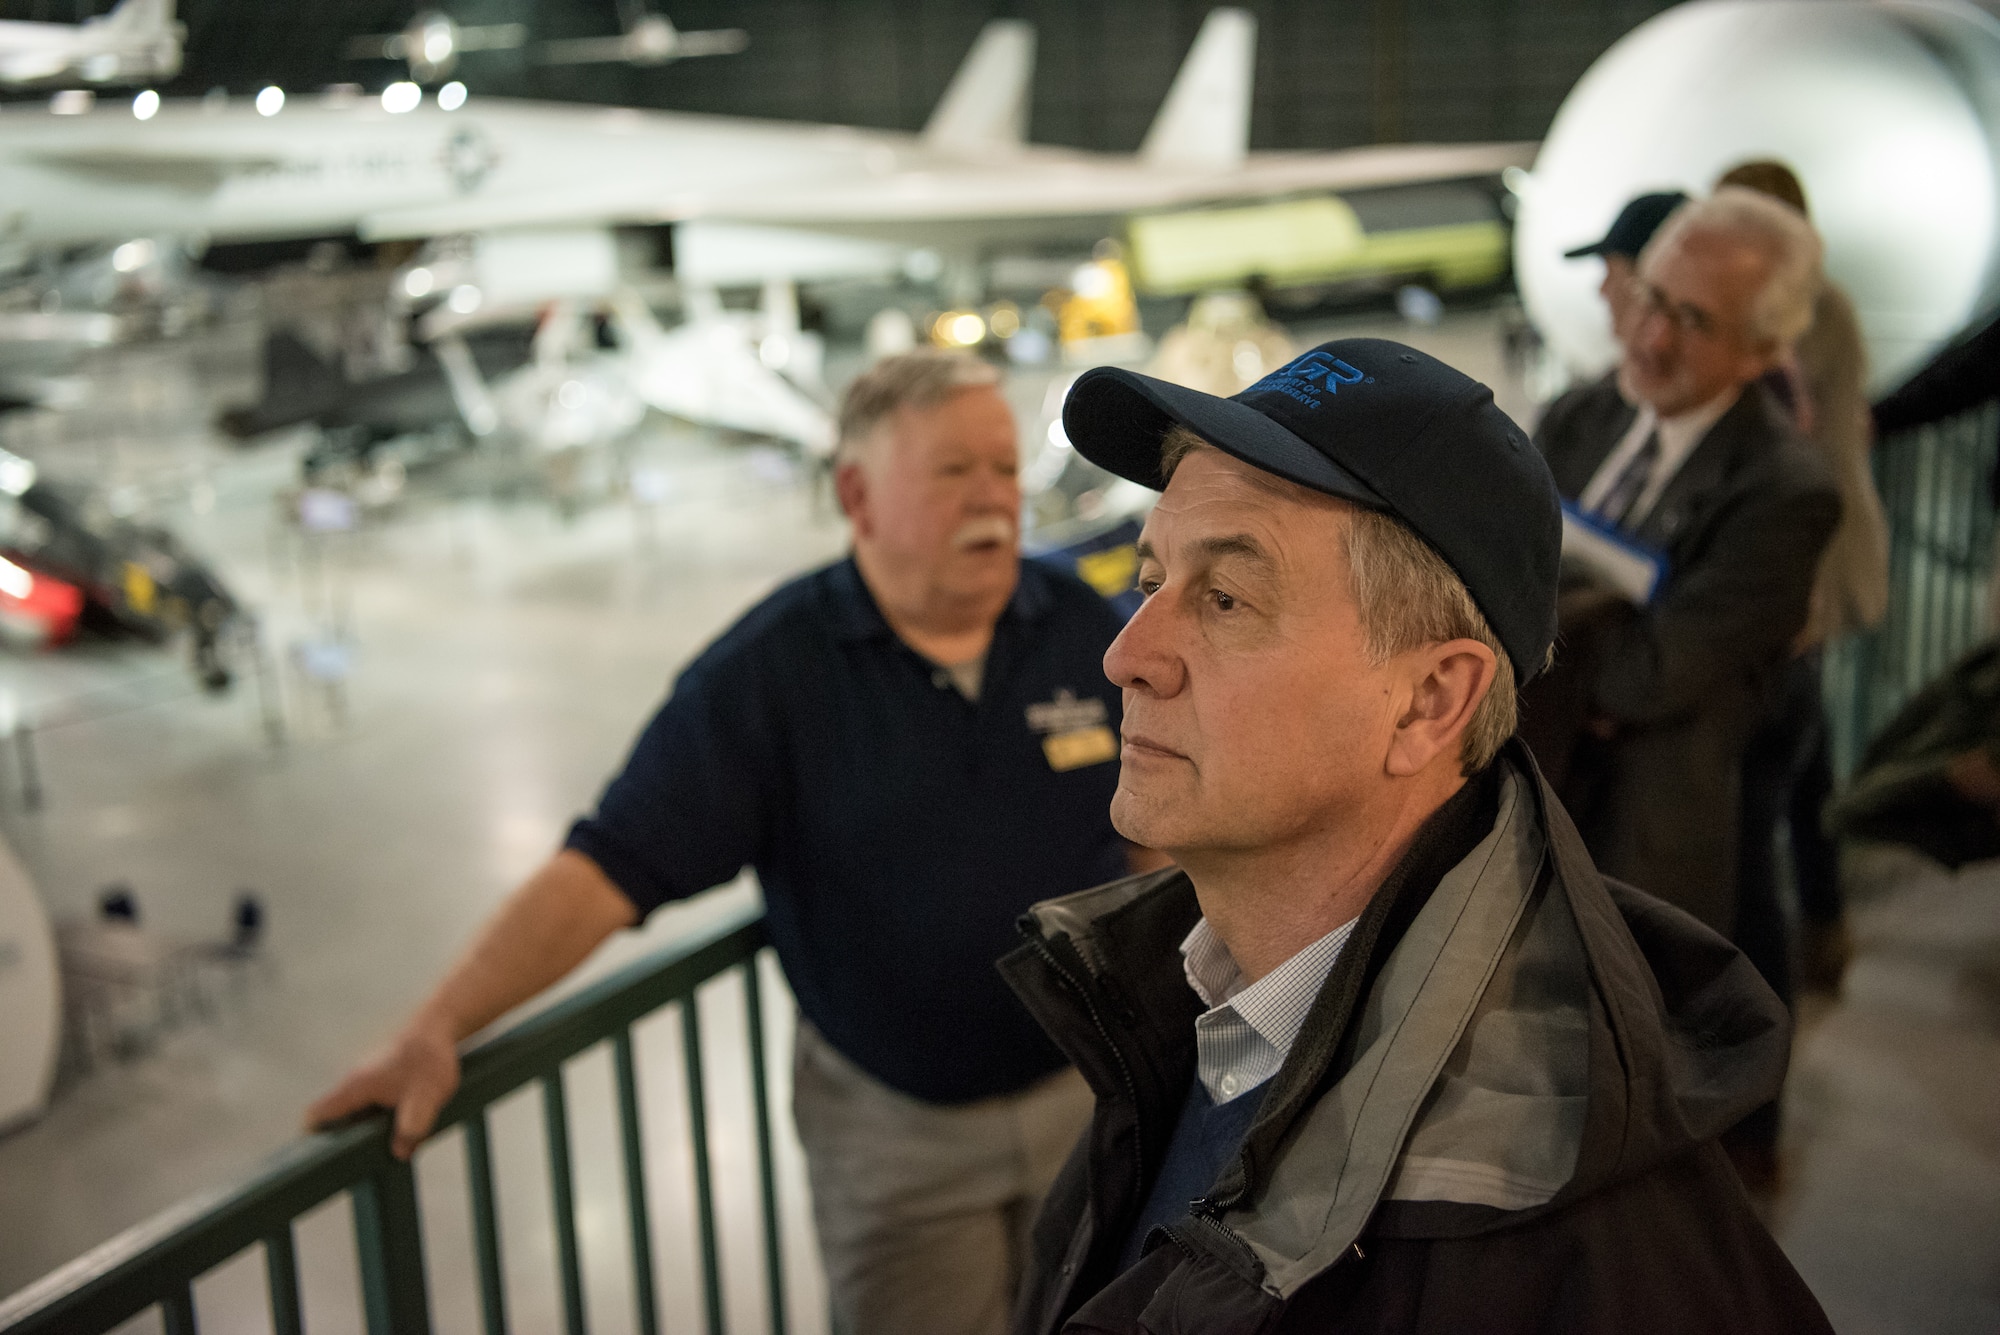 Civilian employers tour the National Museum of the United States Air Force at Wright-Patterson Air Force Base, Ohio, March 15, 2019, with Airmen from the 123rd Airlift Wing and representatives of the Kentucky Committee for Employer Support of the Guard and Reserve. The employers were participating in an ESGR “Bosslift,” which enhances awareness and understanding between National Guardsmen and the civilian employers for whom they work when they’re not on duty. (U.S. Air National Guard photo by Staff Sgt. Joshua Horton)